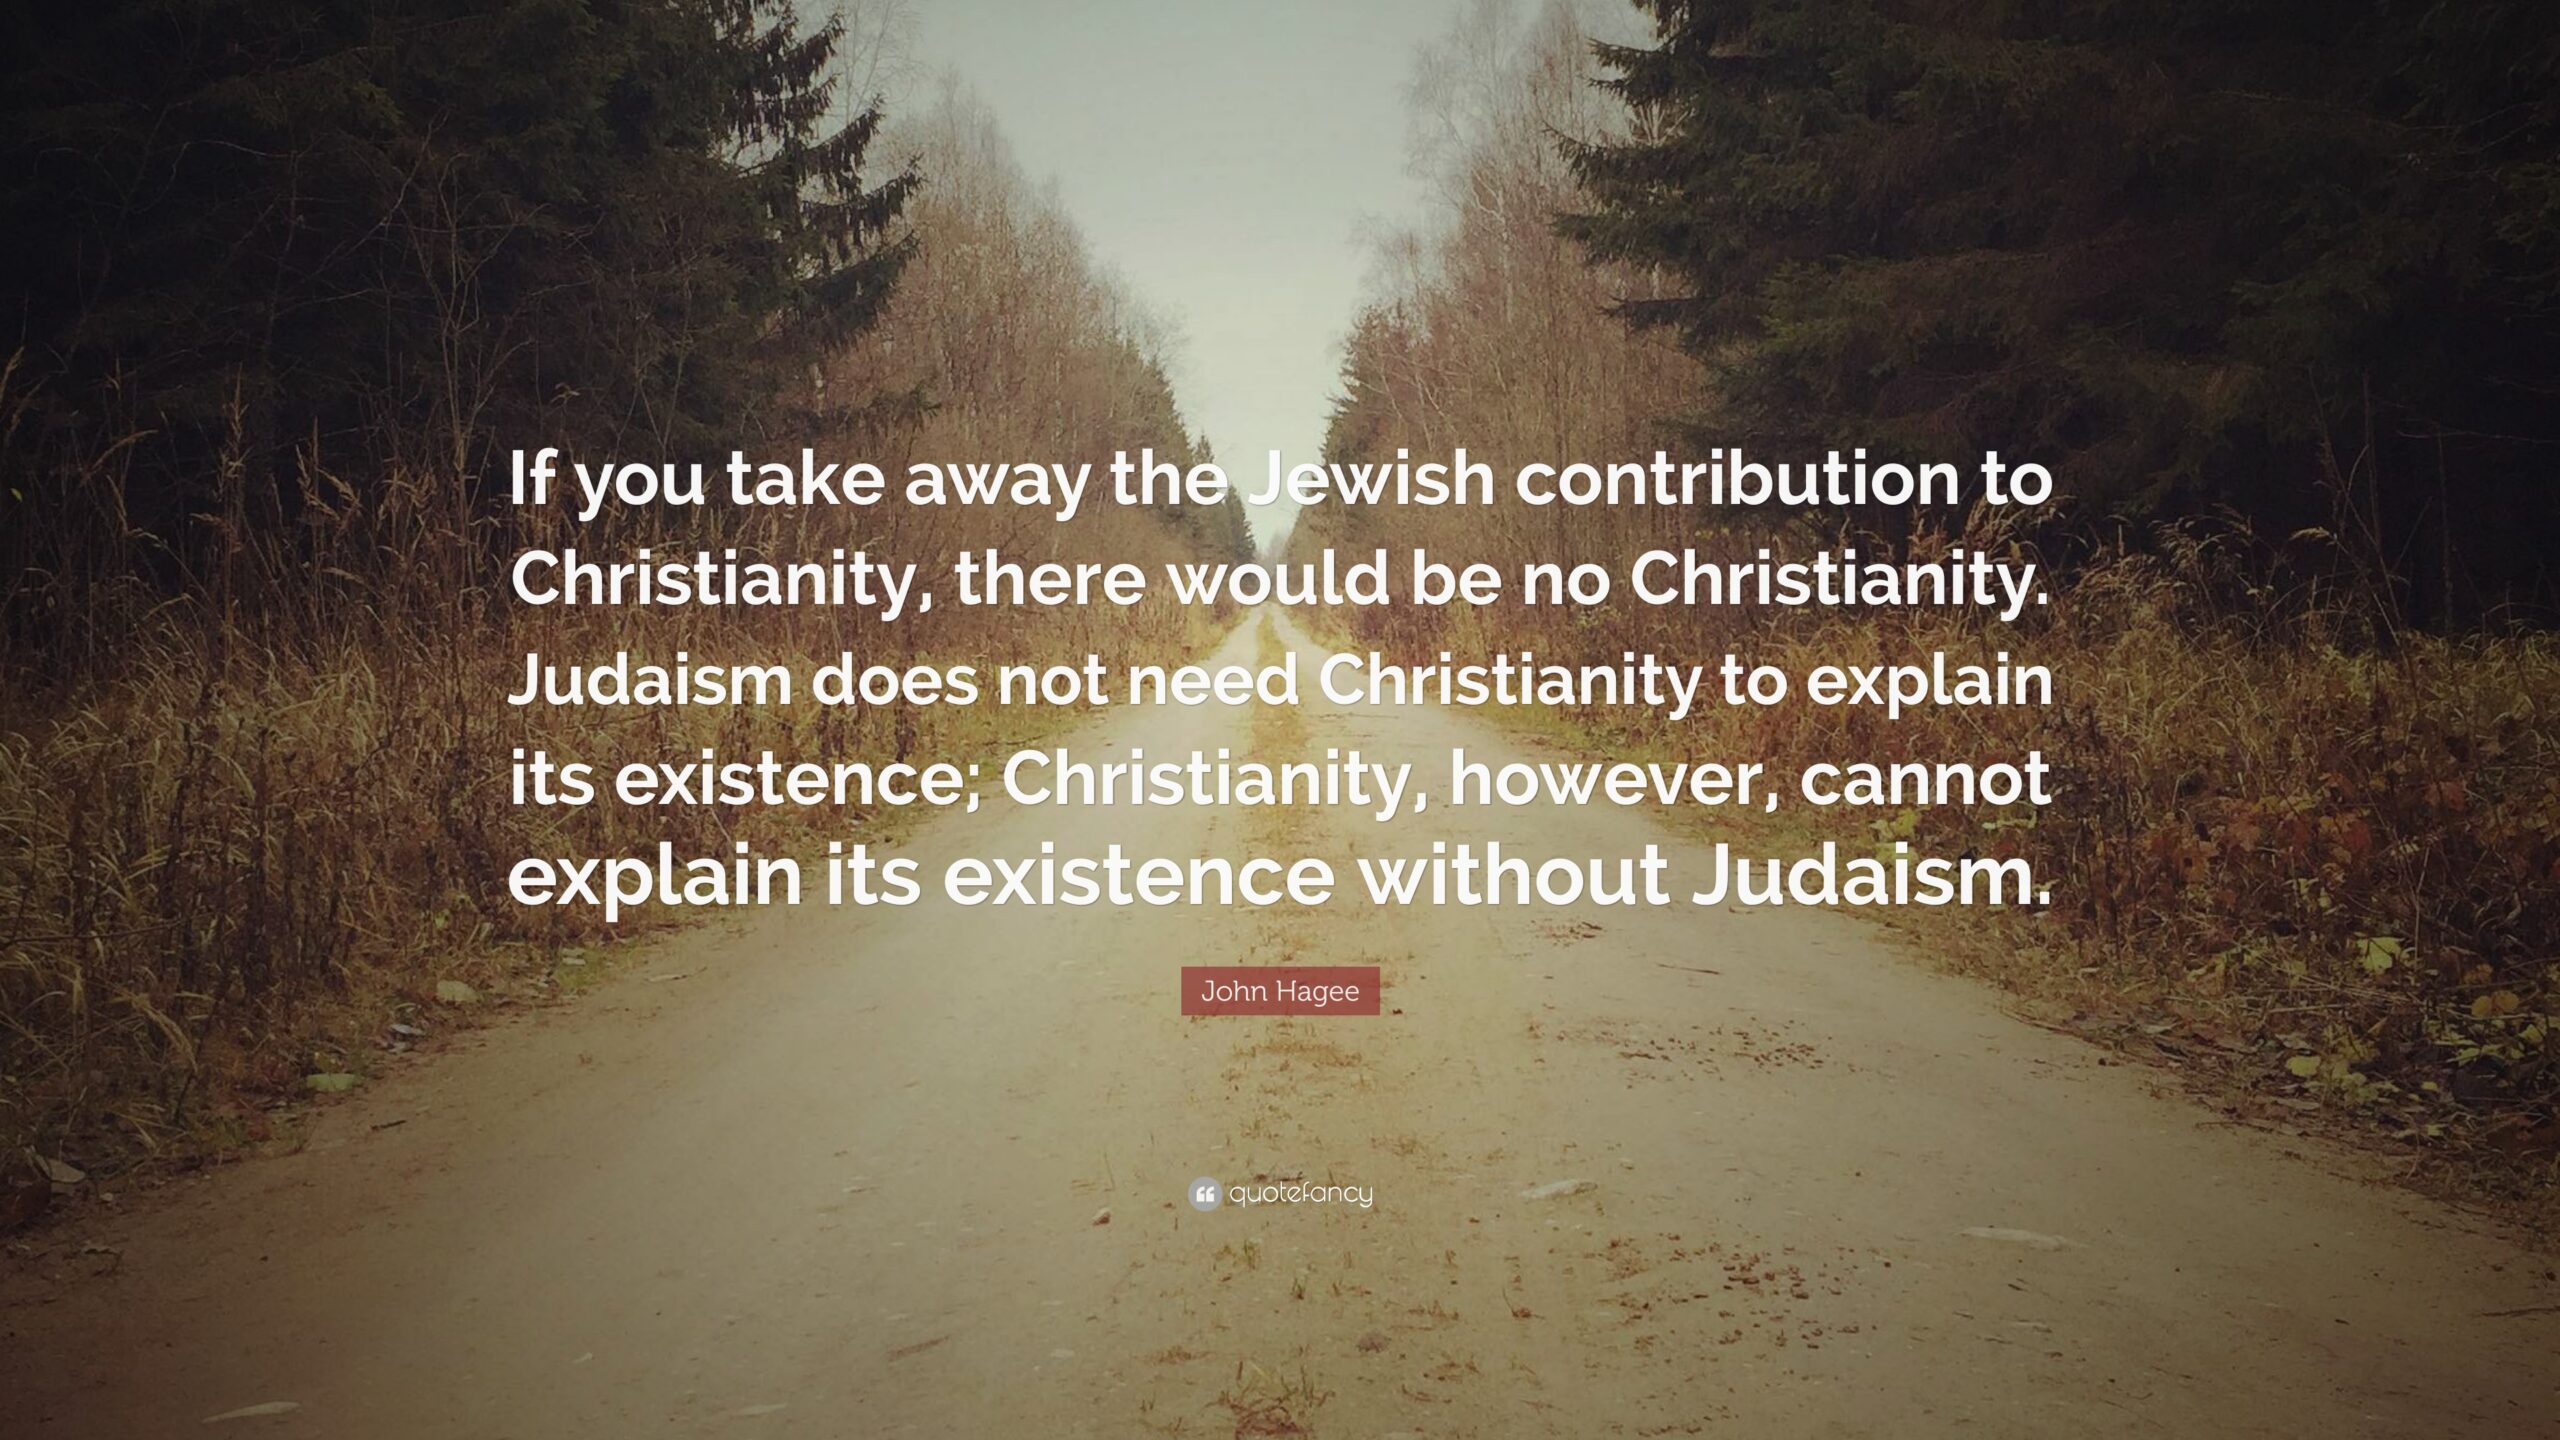 John Hagee Quote “If you take away the Jewish contribution to